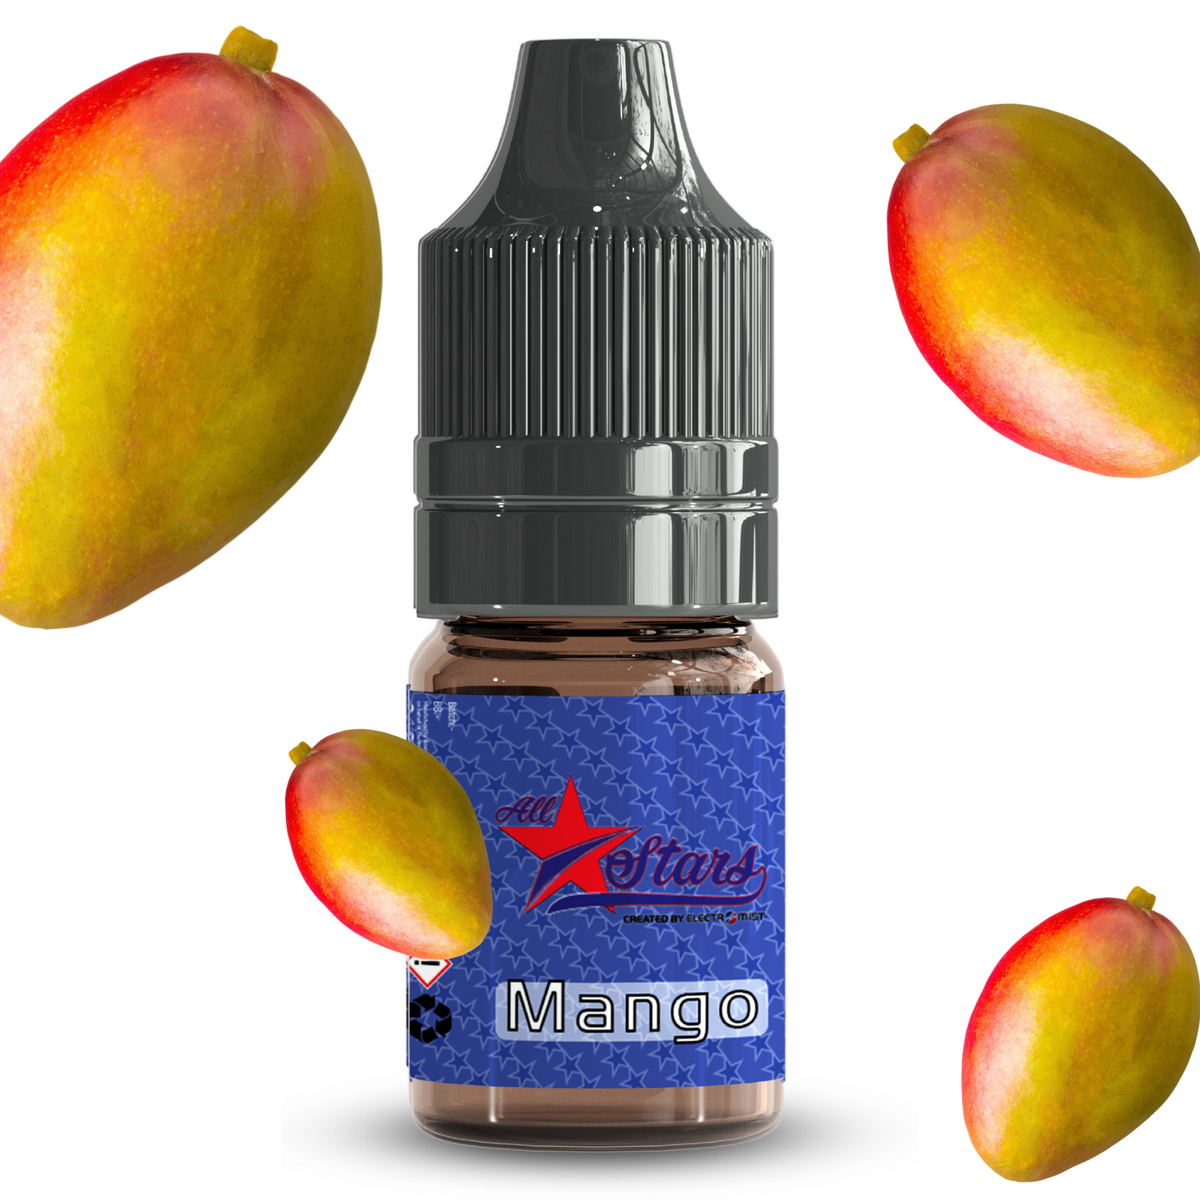 All Stars E-Liquid from the vape brand you can trust, Electromist, . Get your taste buds ready for a flavour sensation, Mango. Nicotine Content: 6mg/12mg/18mg Products may contain nicotine. For over 18s Only ejuice, vape pen, eliquid, e cigarette, 10ml, vaping, cloud, PG, VG, 60/40, vape liquid, Flavour, TPD